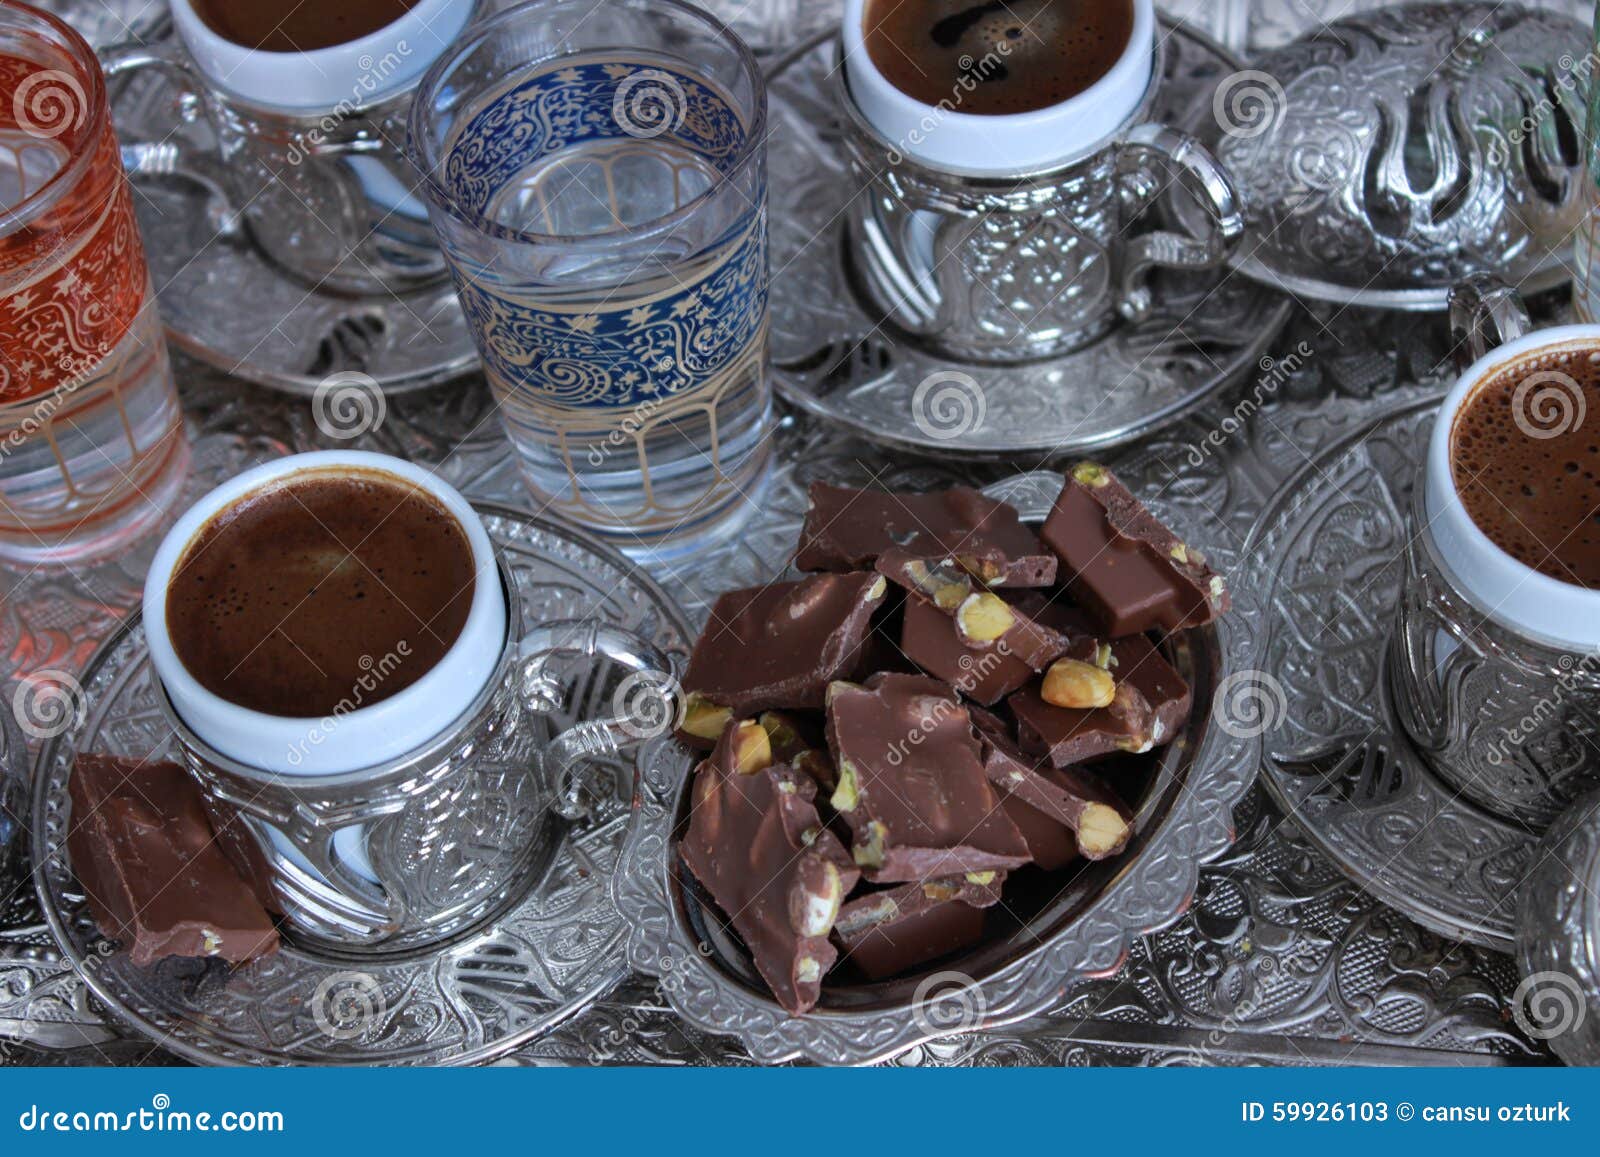 turkish coffee and copper cup